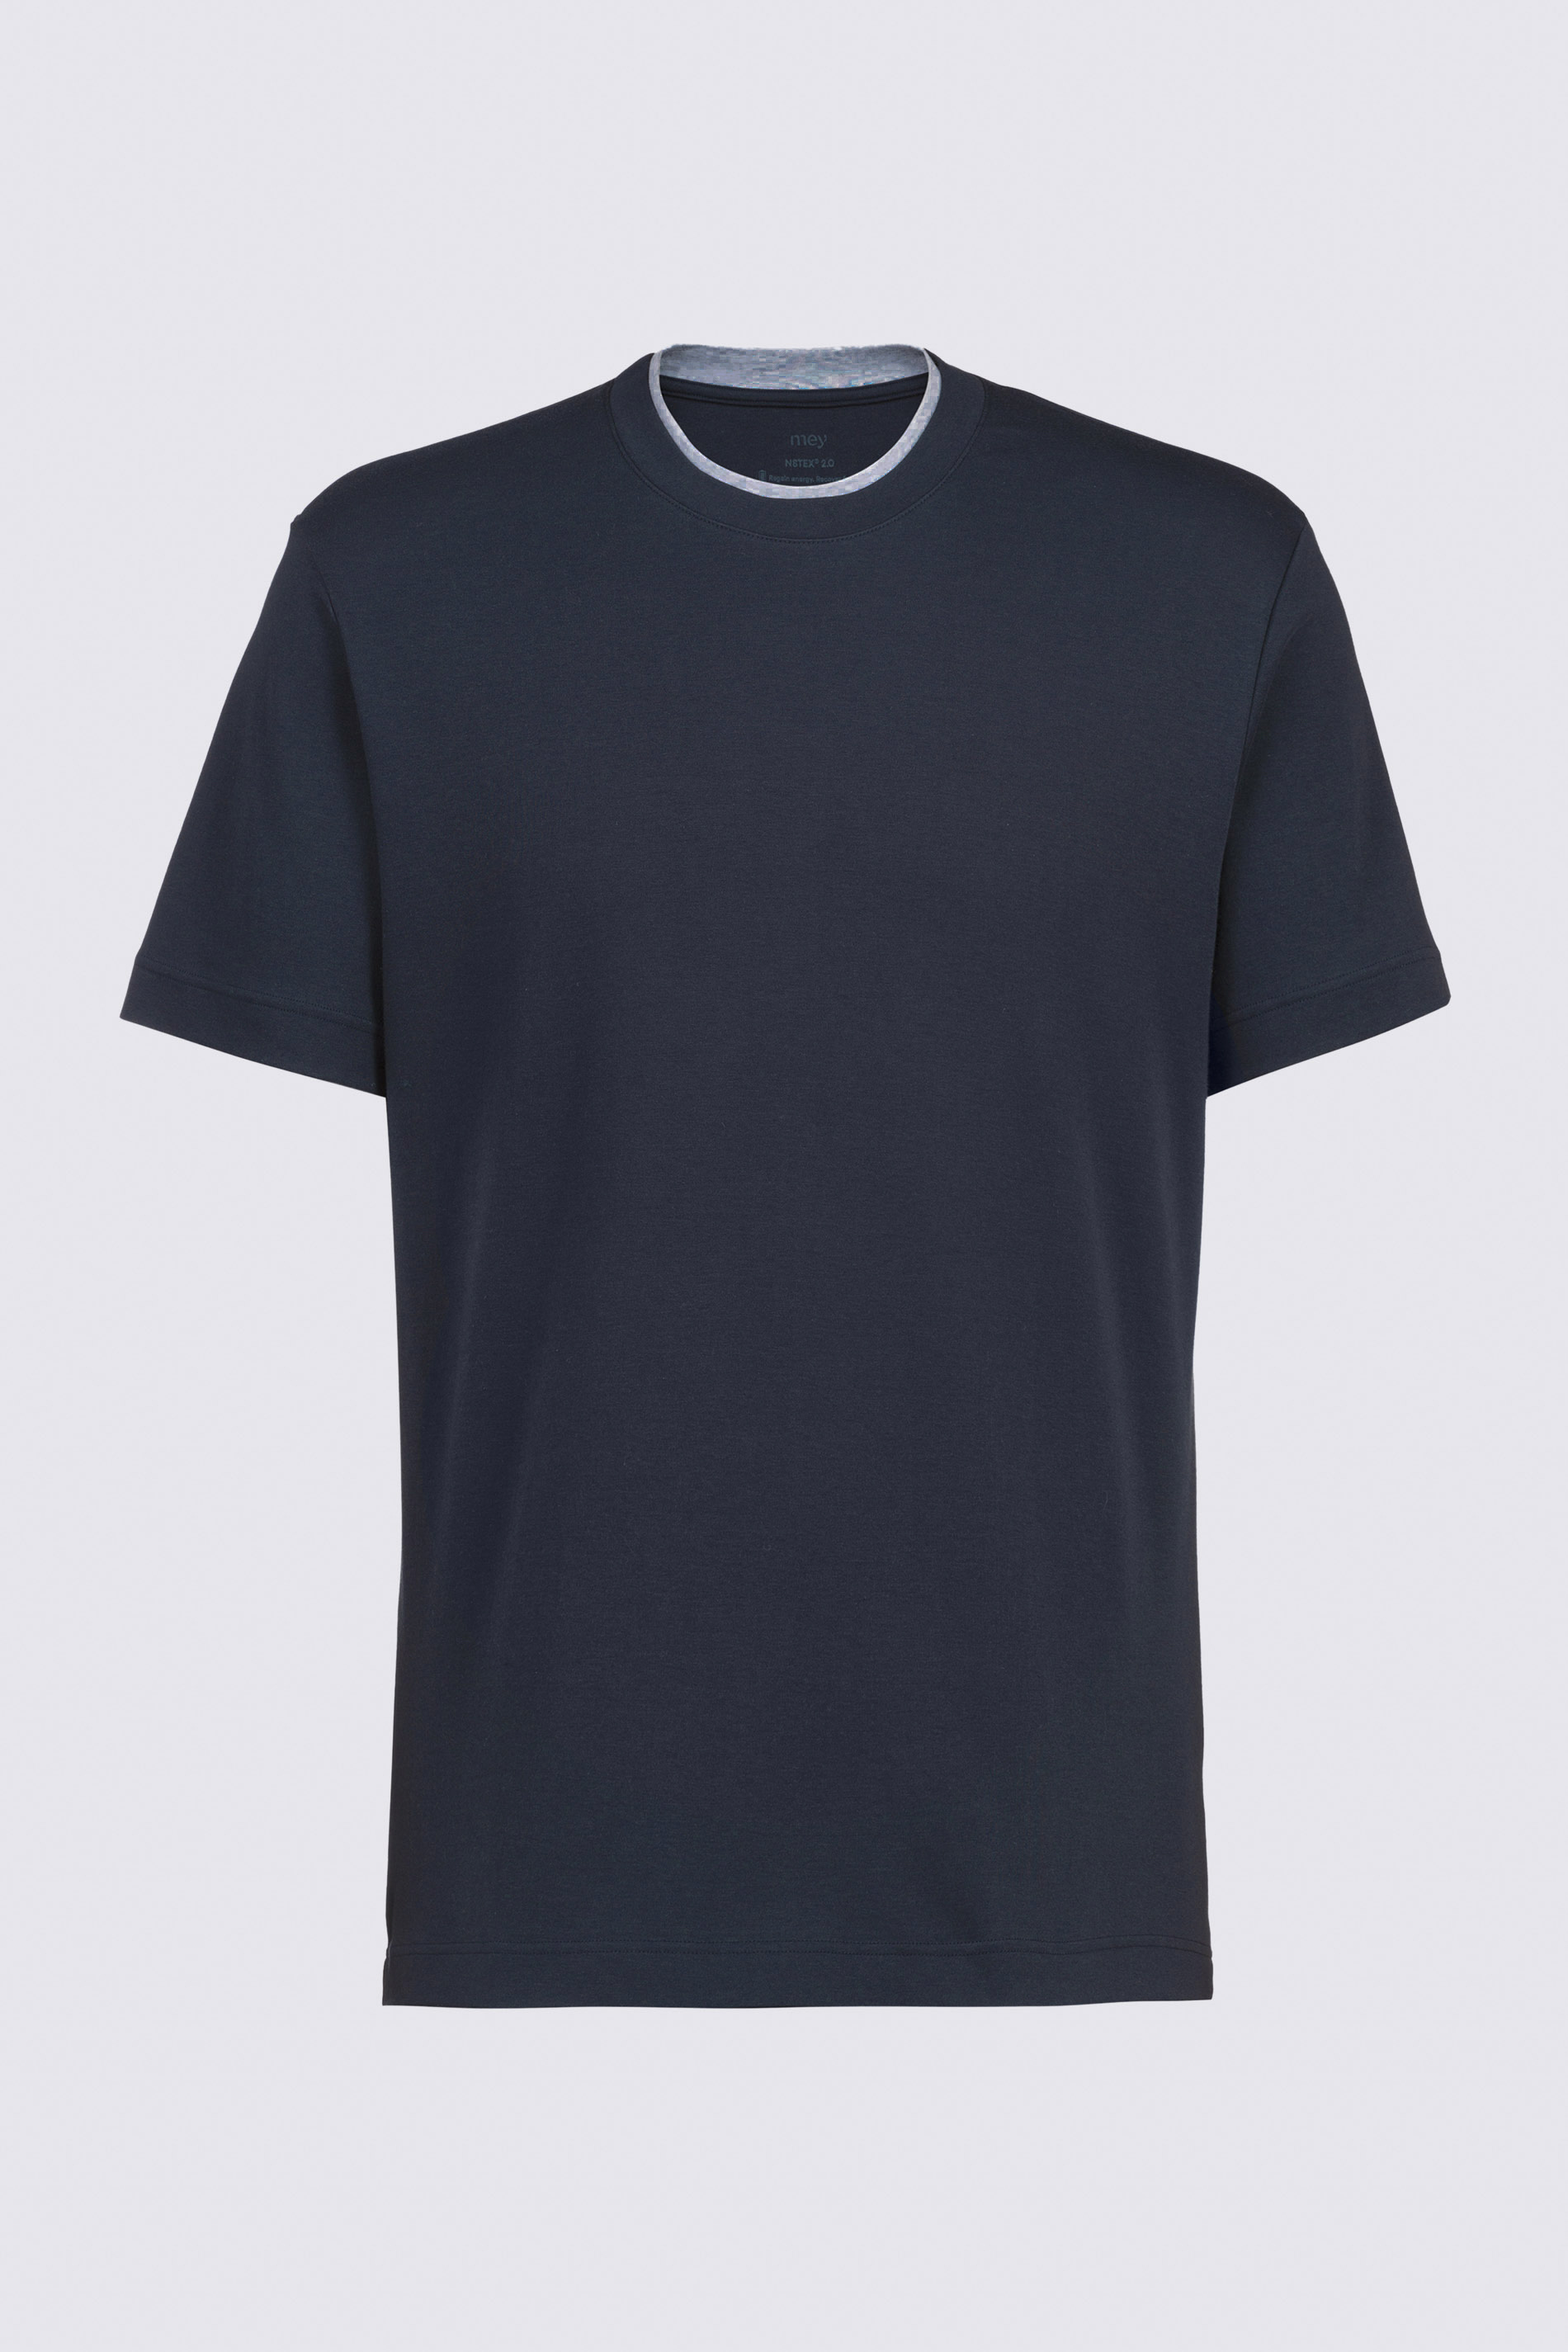 T-shirt Serie N8TEX 2.0 Uitknippen | mey®